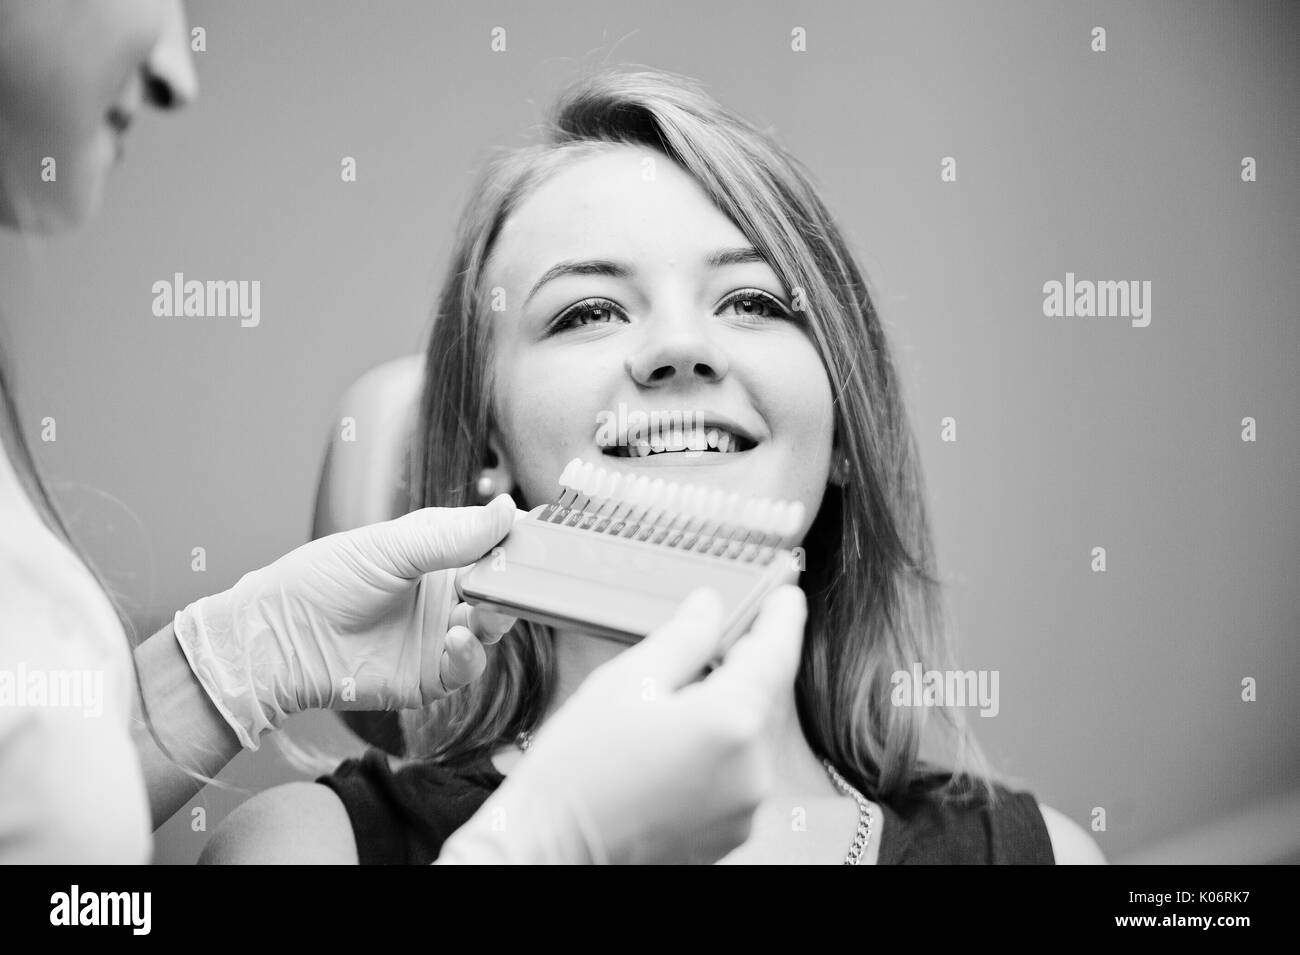 Talented female dentist figuring out what is the matching teeth color for her patient. Black and white photo. Stock Photo